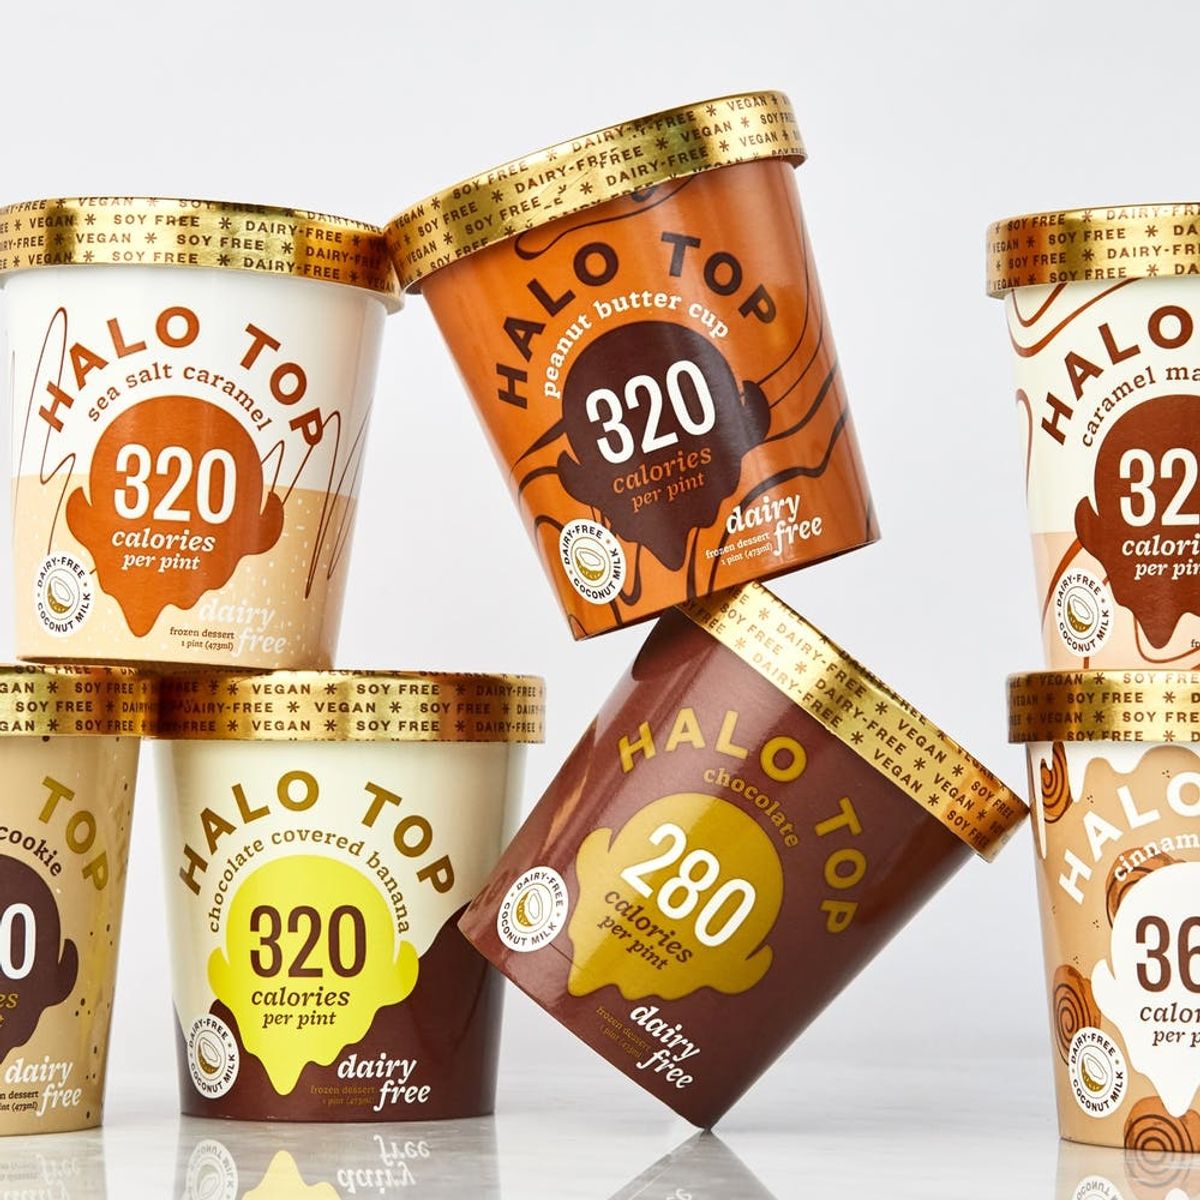 Your Favorite Low-Calorie Ice Cream Now Comes in Vegan and Non-Dairy